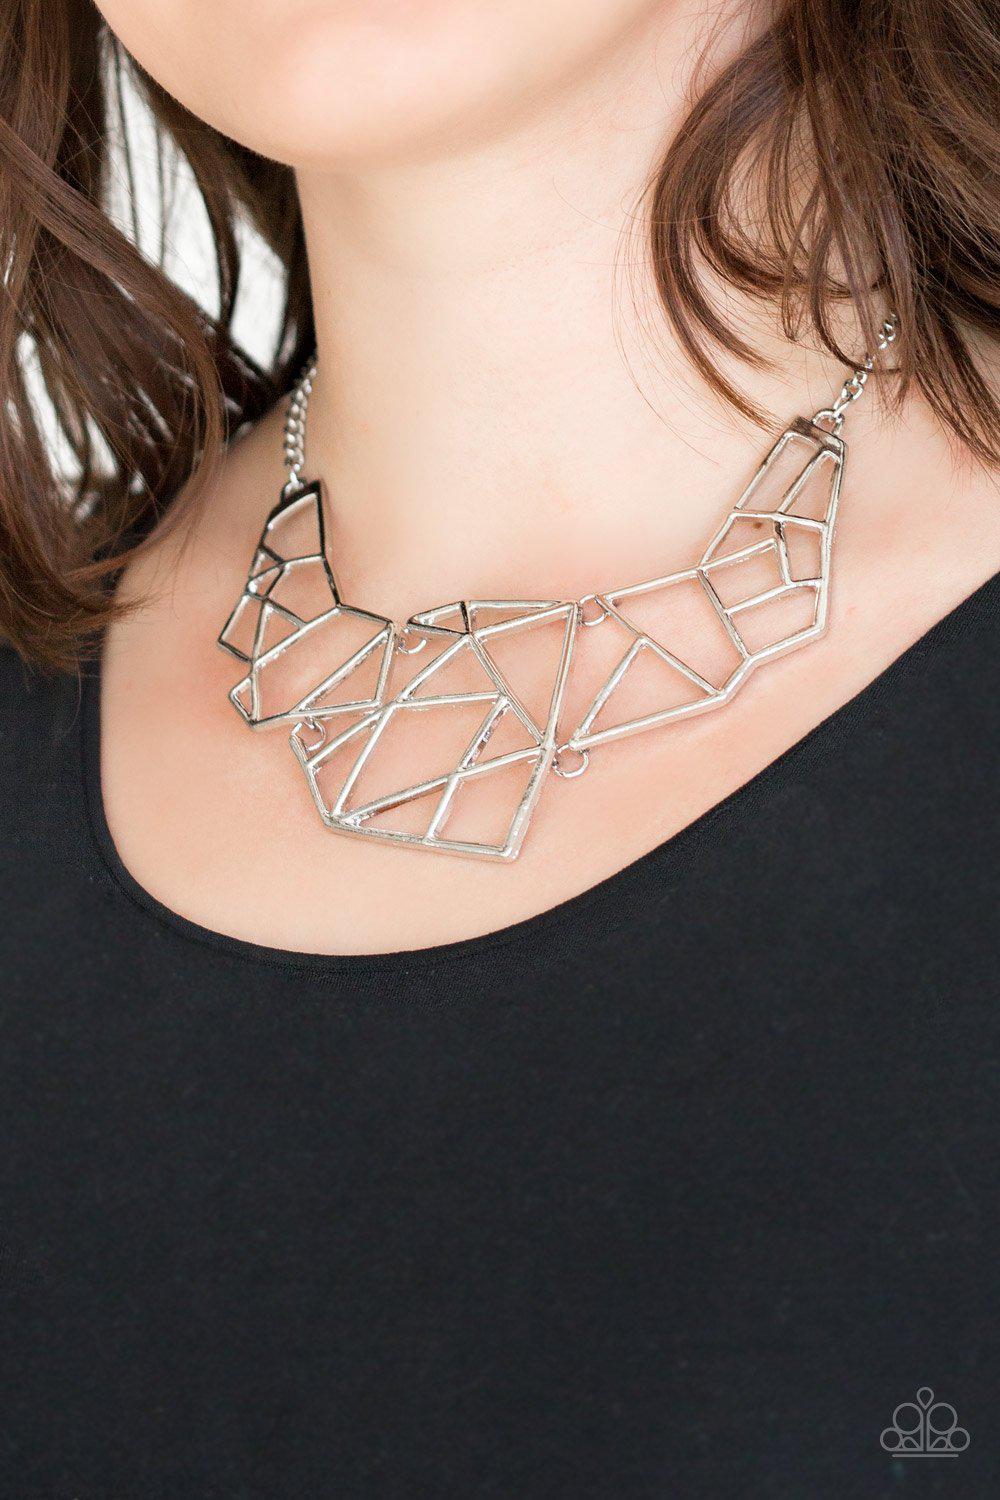 World Shattering Silver Statement Necklace - Paparazzi Accessories- model - CarasShop.com - $5 Jewelry by Cara Jewels